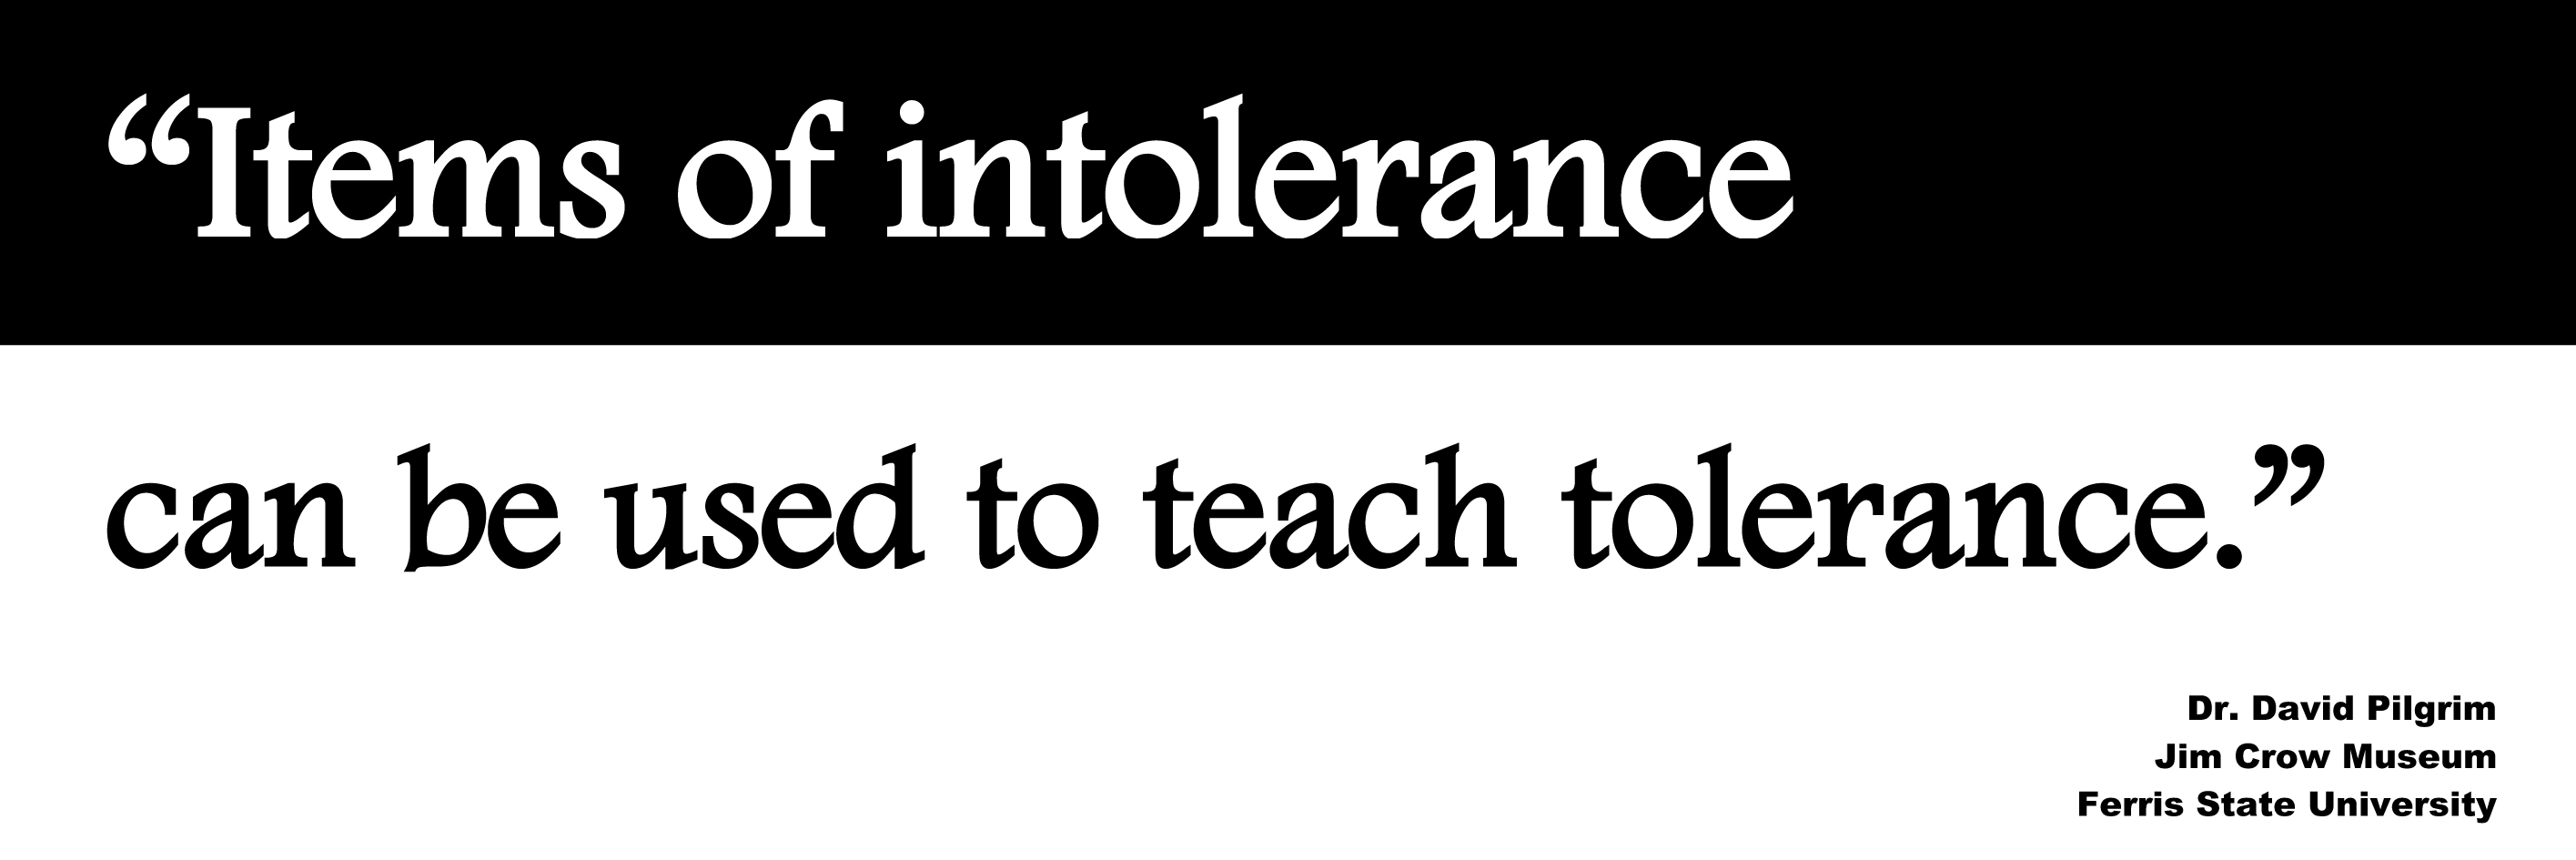 Items of intolerance can be used to teach tolerance